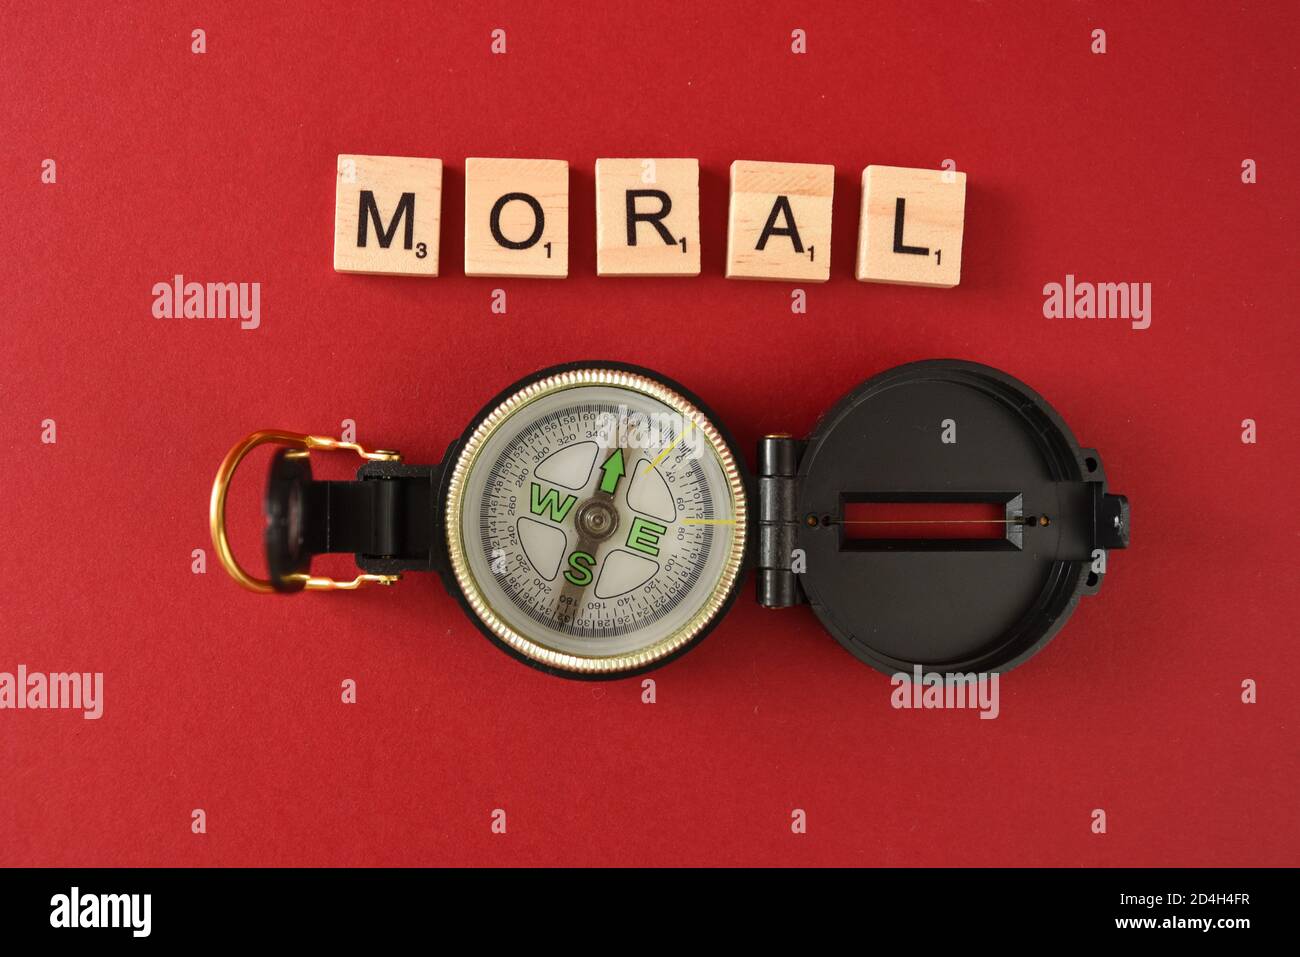 Moral Compass using a compass and tiles with letters on Stock Photo